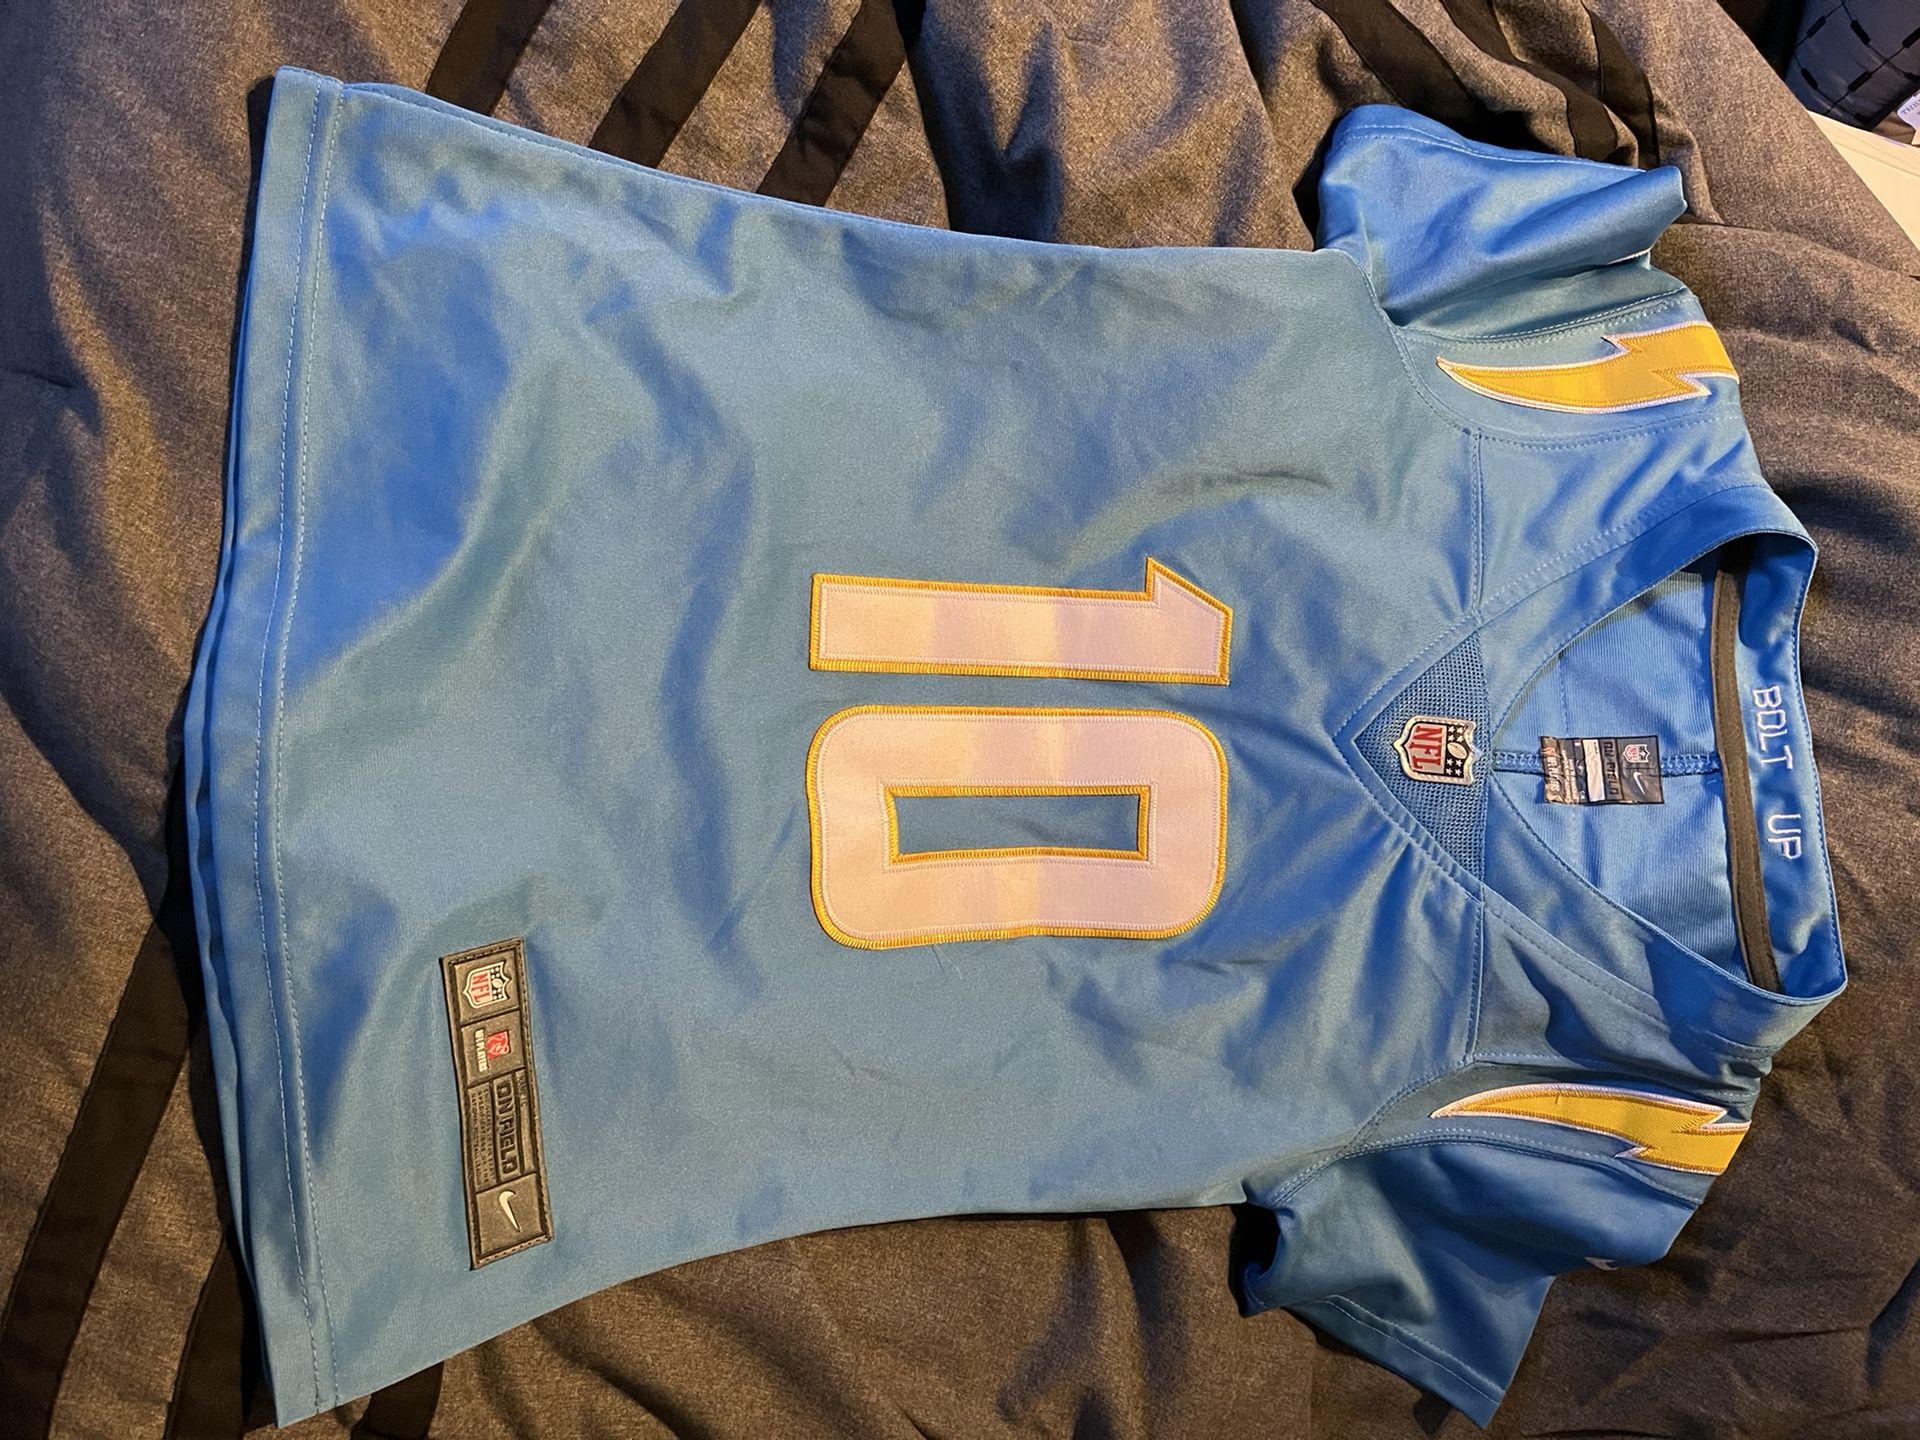 LA Chargers Womens Jersey